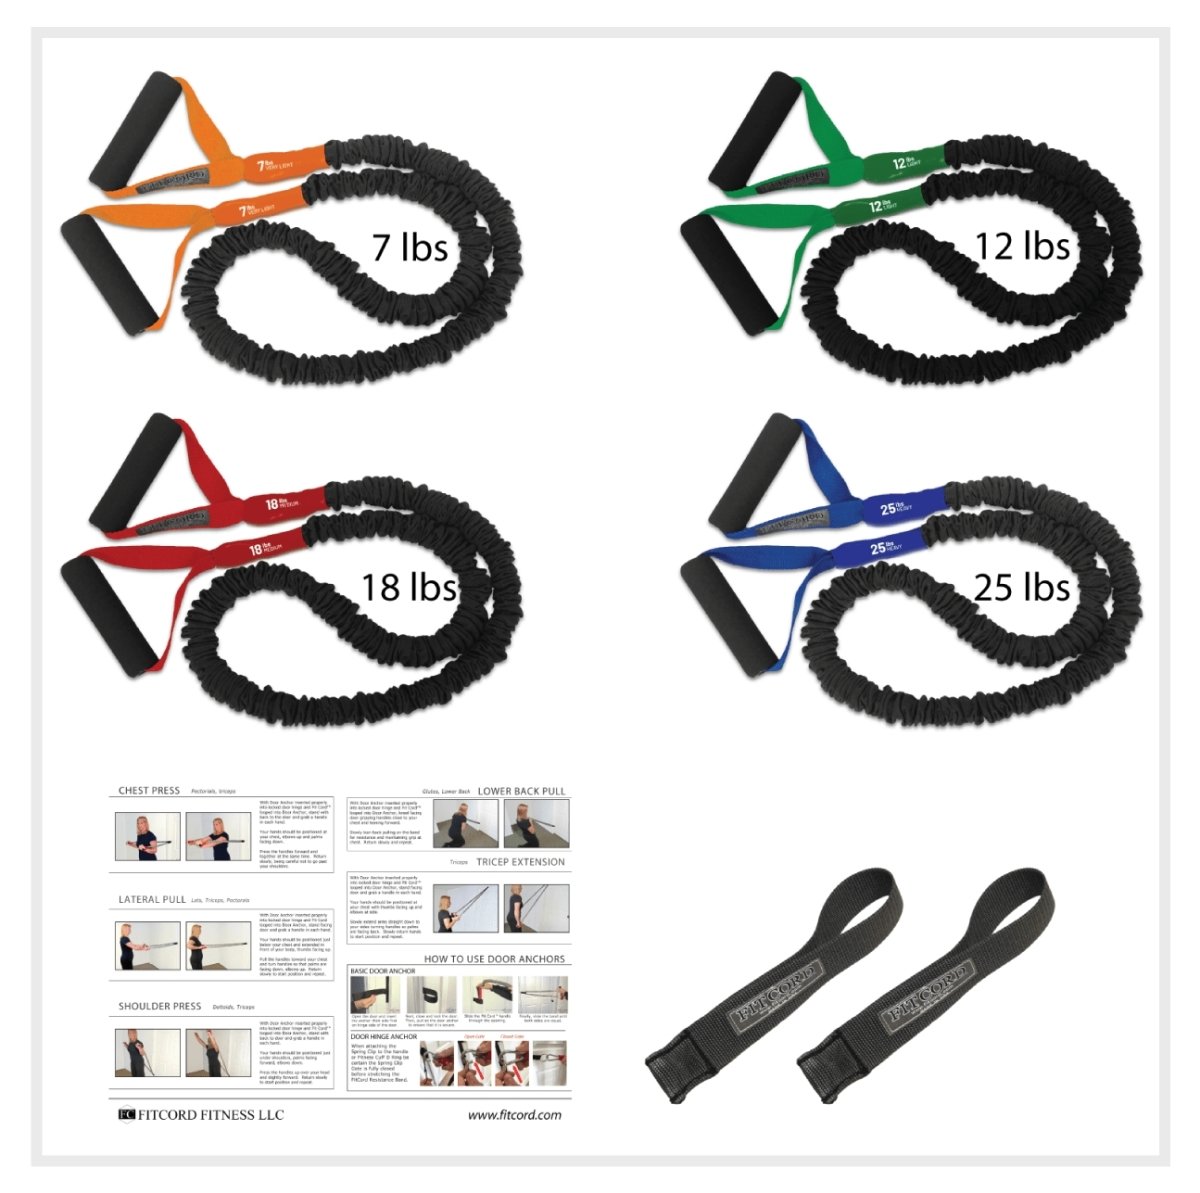 FitCord Resistance Band home gym. Includes set of 4 Covered American Made Exercise Bands with Handles, Anchors and Workout Guide. Great for Home gym, pilates classes, outdoor workouts, weight loss, Body Toning, Increasing mobility or just staying healthy and fit.  The Safety sleeve cover protects you and the band from snapping back and causing injury. Proven to be the best resistance bands, the longest lasting exercise band and the highest quality exercise cord on the market today.